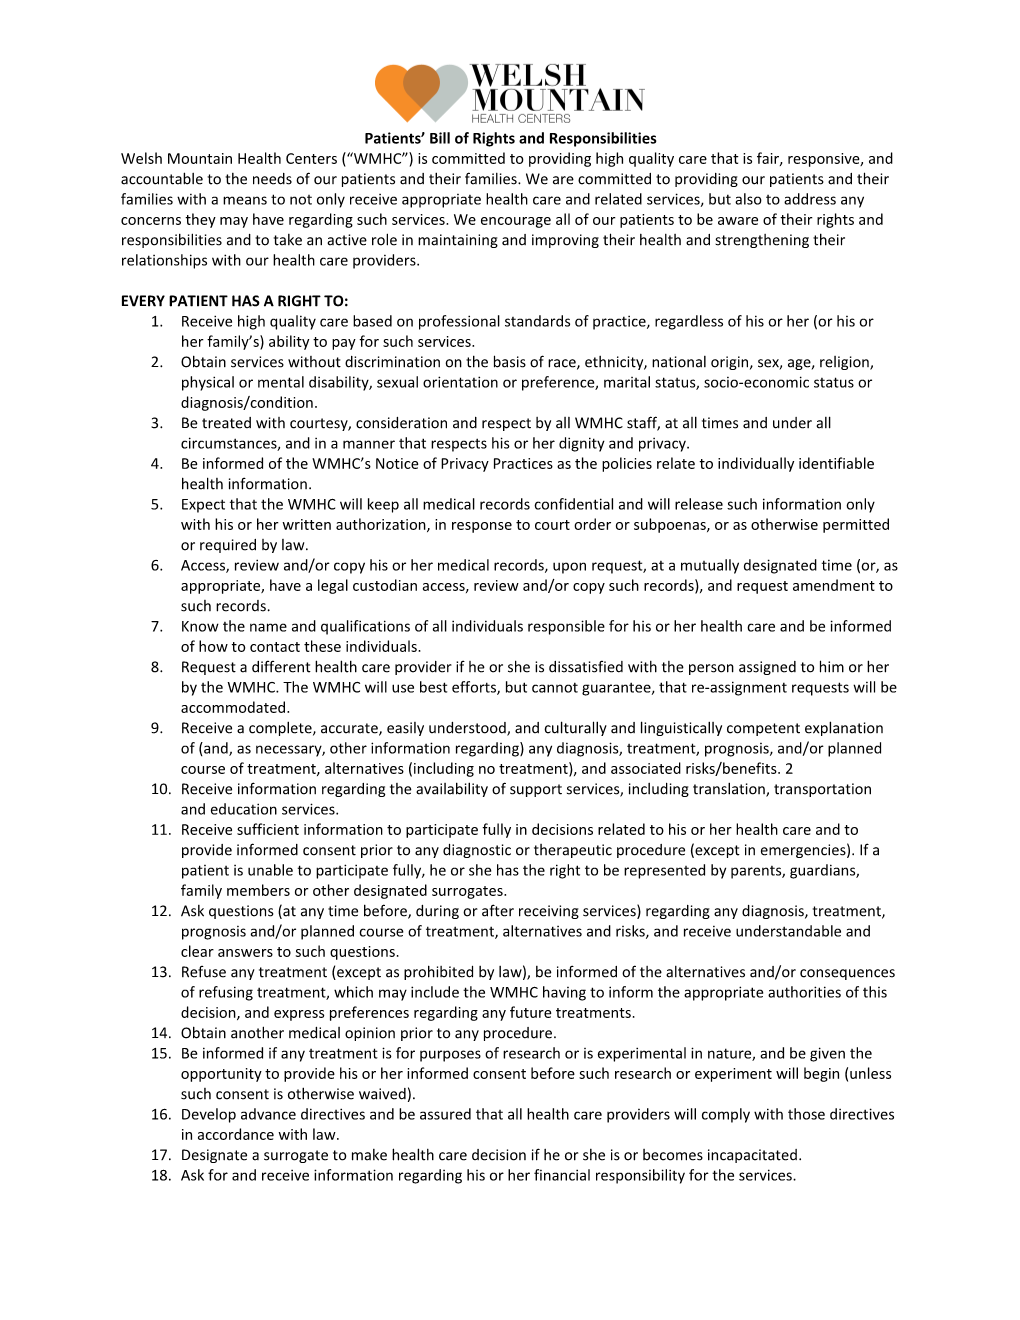 Patients Bill of Rights and Responsibilities